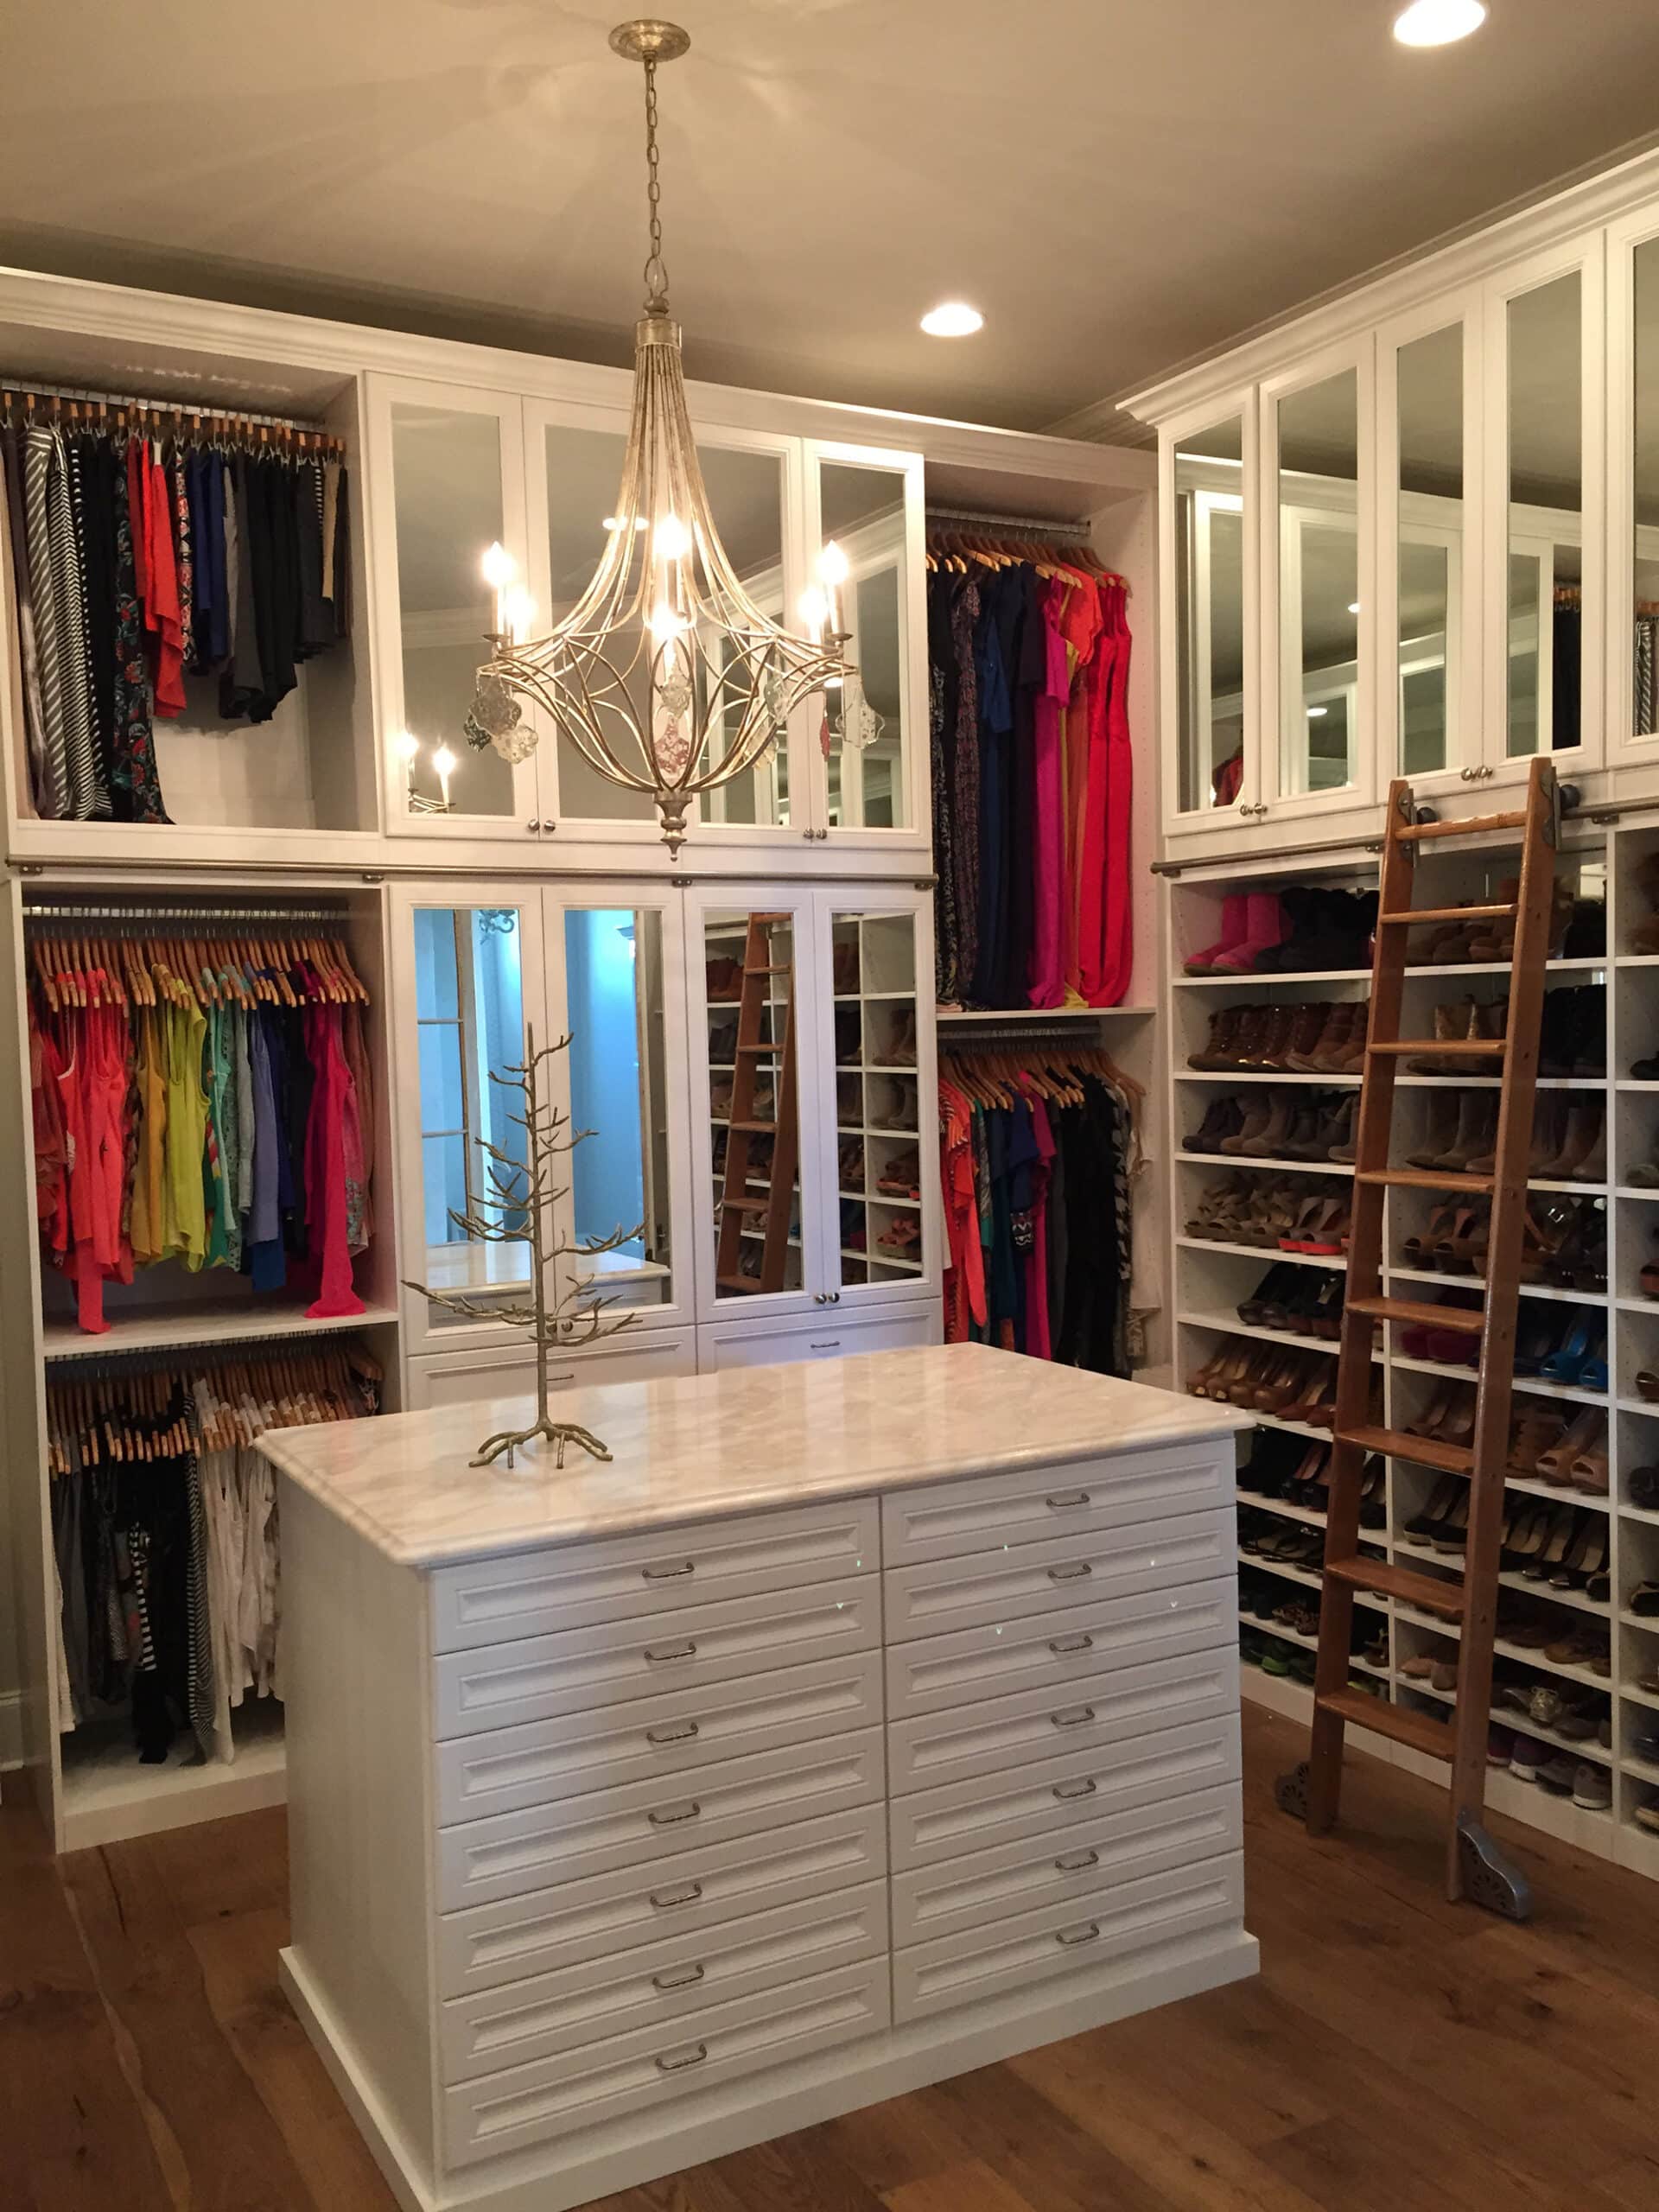 Walk-in closet with white shelving, mirrors framed in white and a library ladder